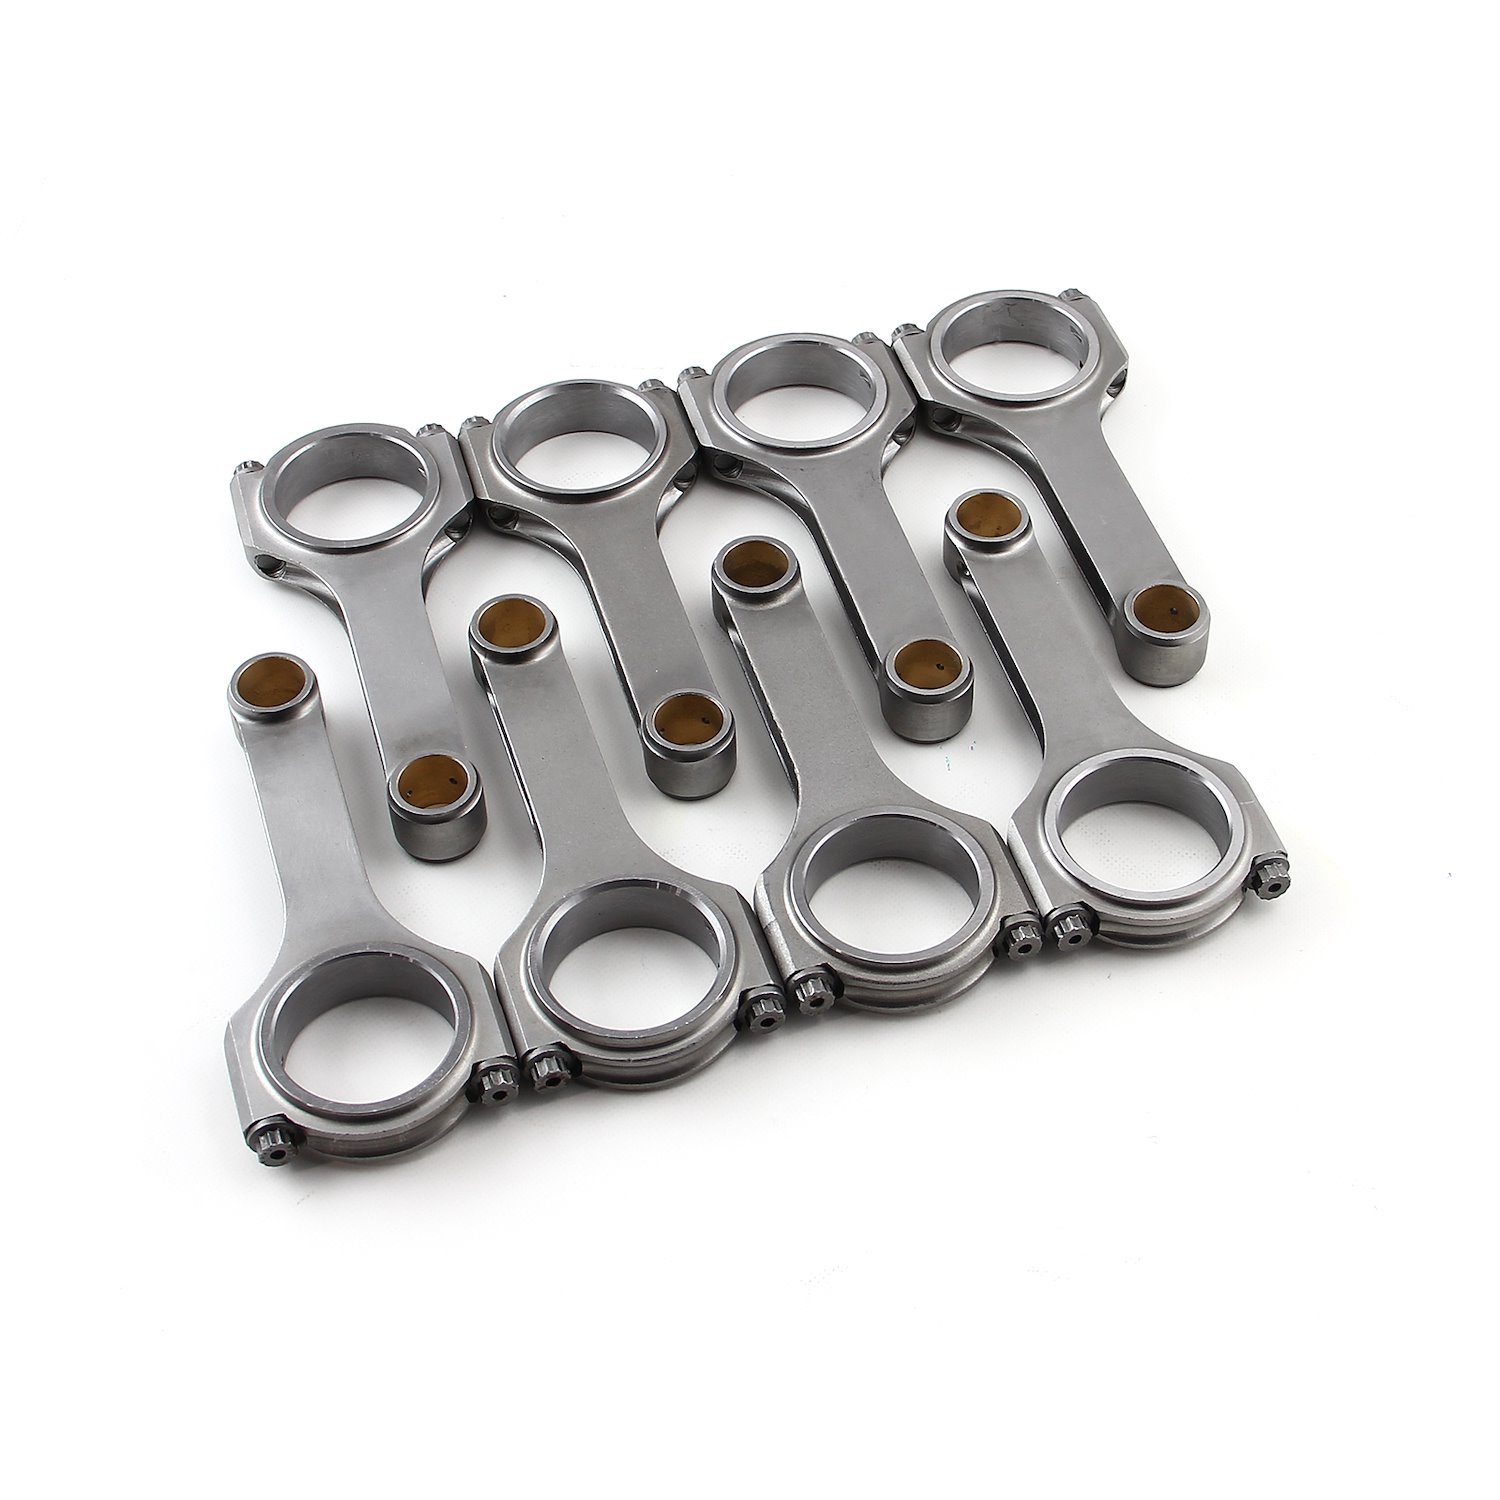 H Beam 6.100 2.100 .927 Bronze Bush 4340 Connecting Rods Suits Chevy LS